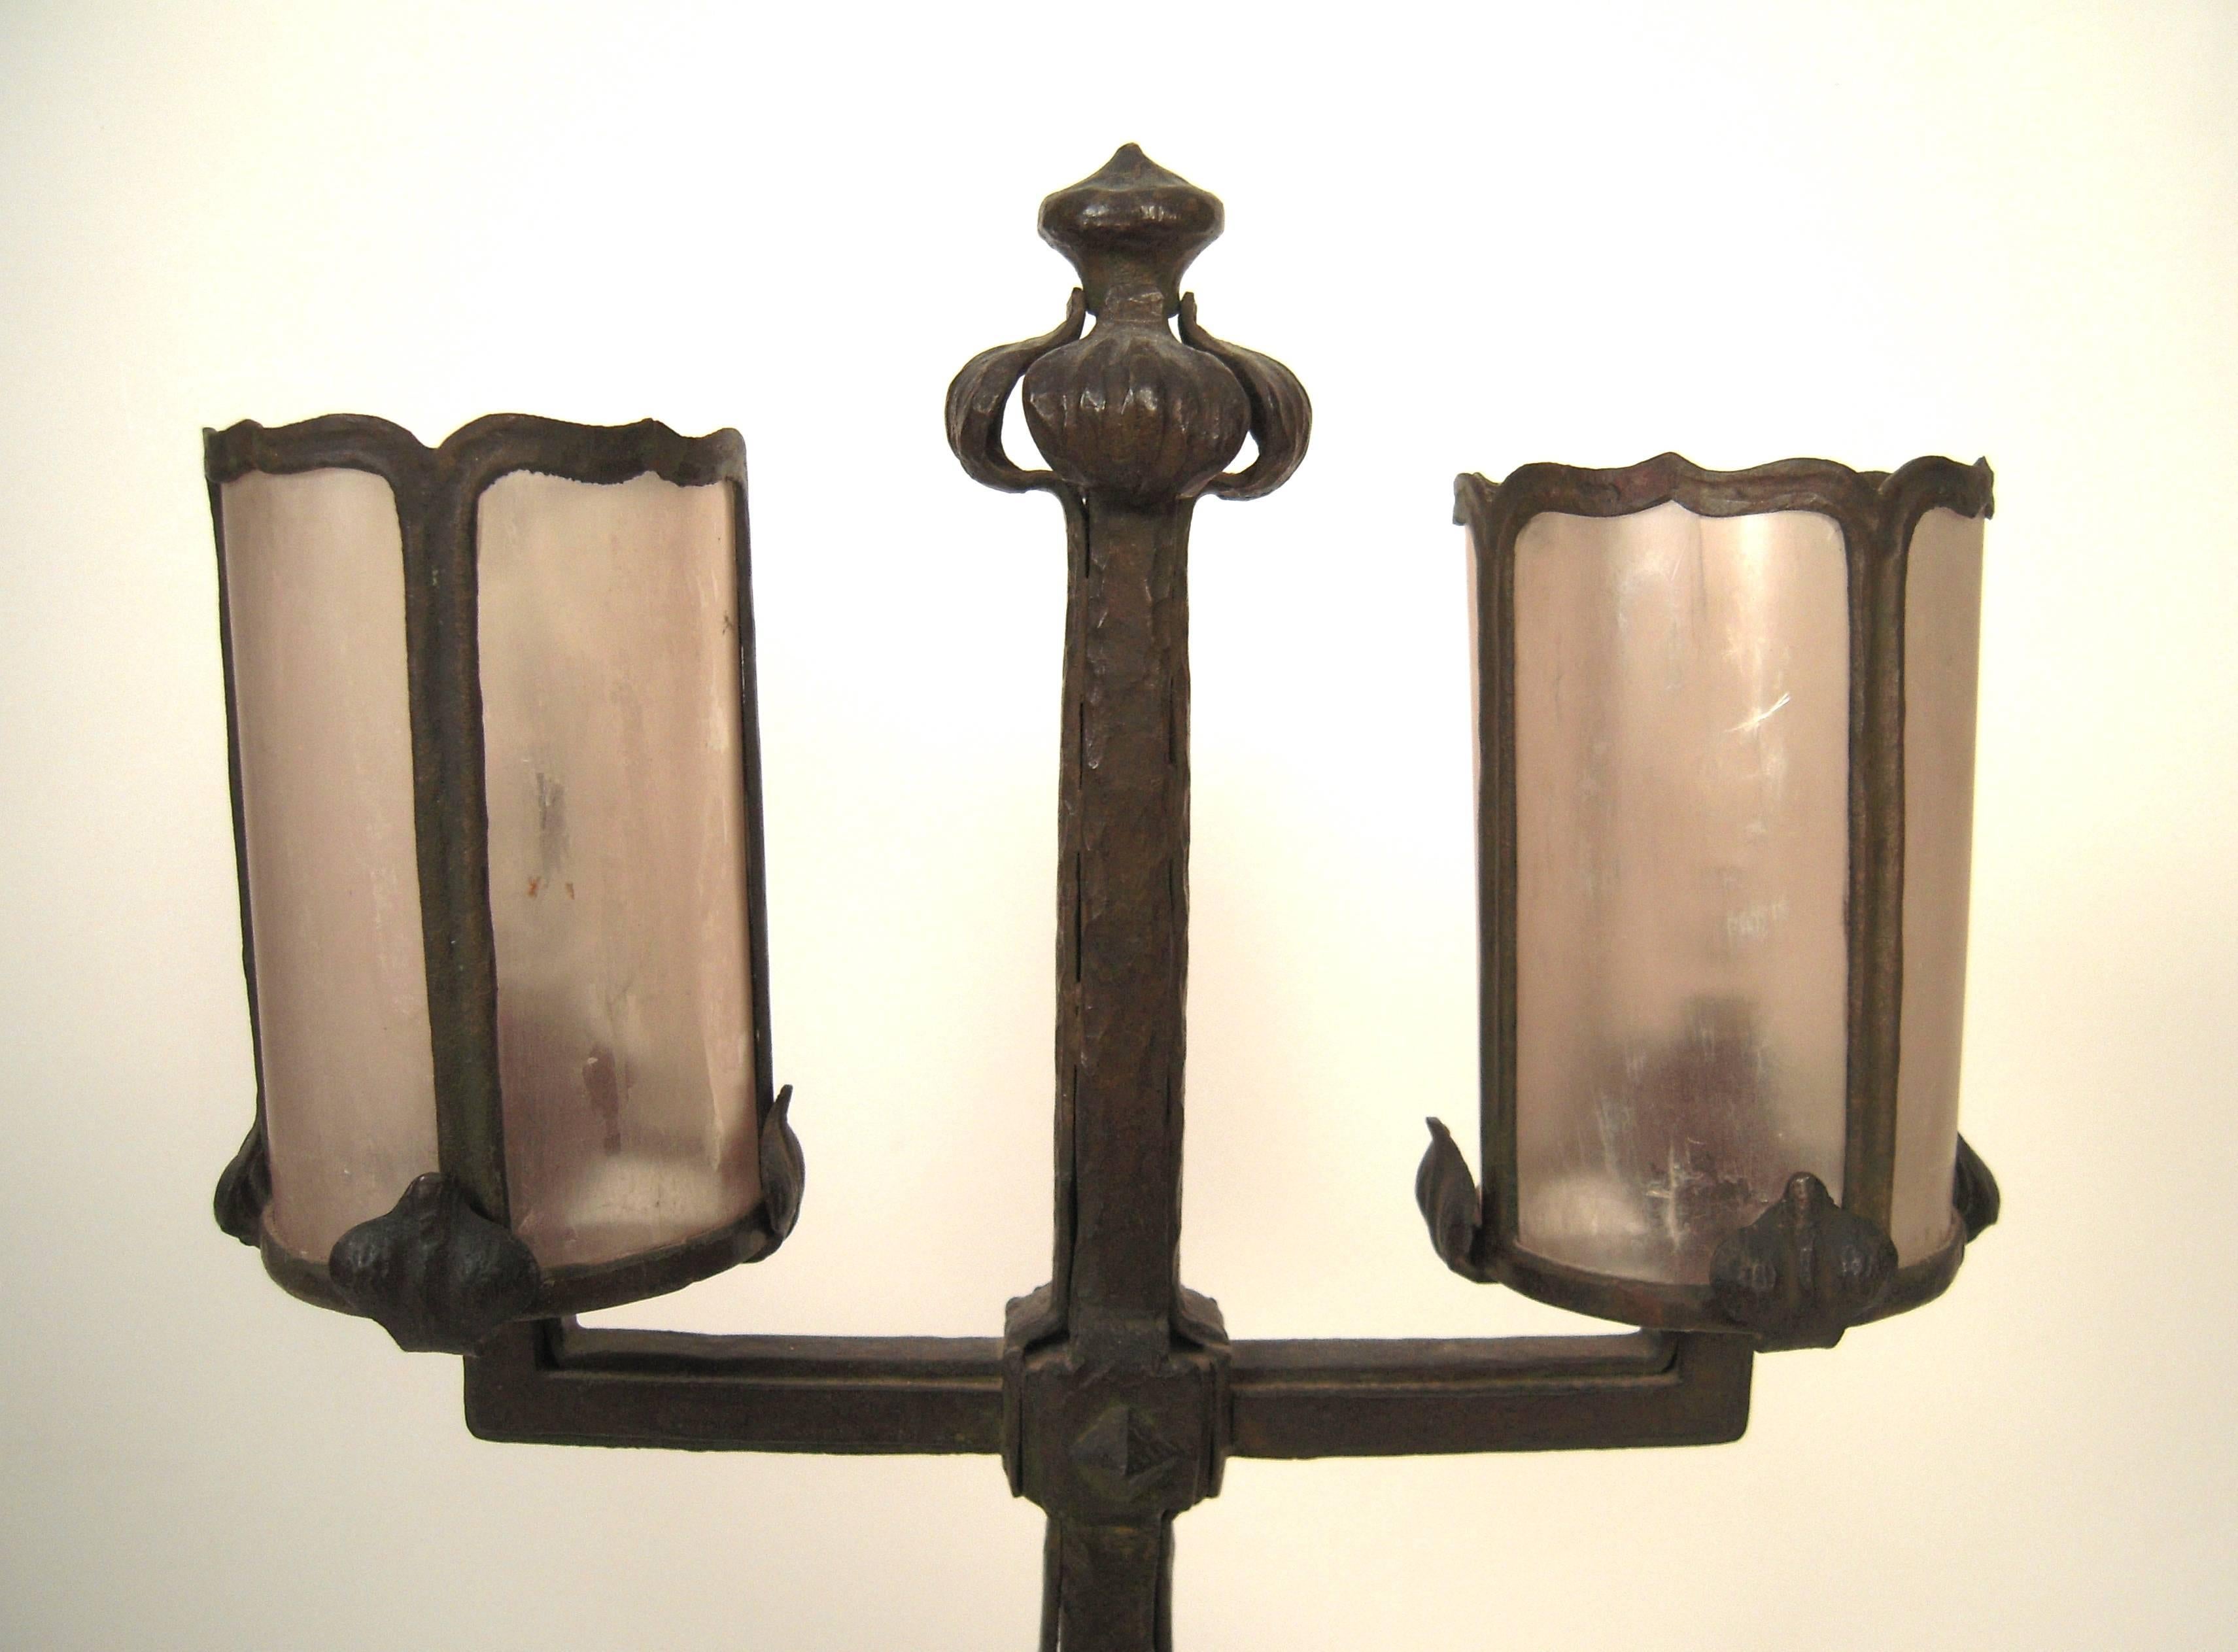 A fine quality Arts and Crafts period wrought iron lamp with its original mica cylindrical shades, supported by leaf-form brackets, on an base formed by four hand-wrought straps, terminating in a leaf or flower-form base, circa 1905. Wonderful